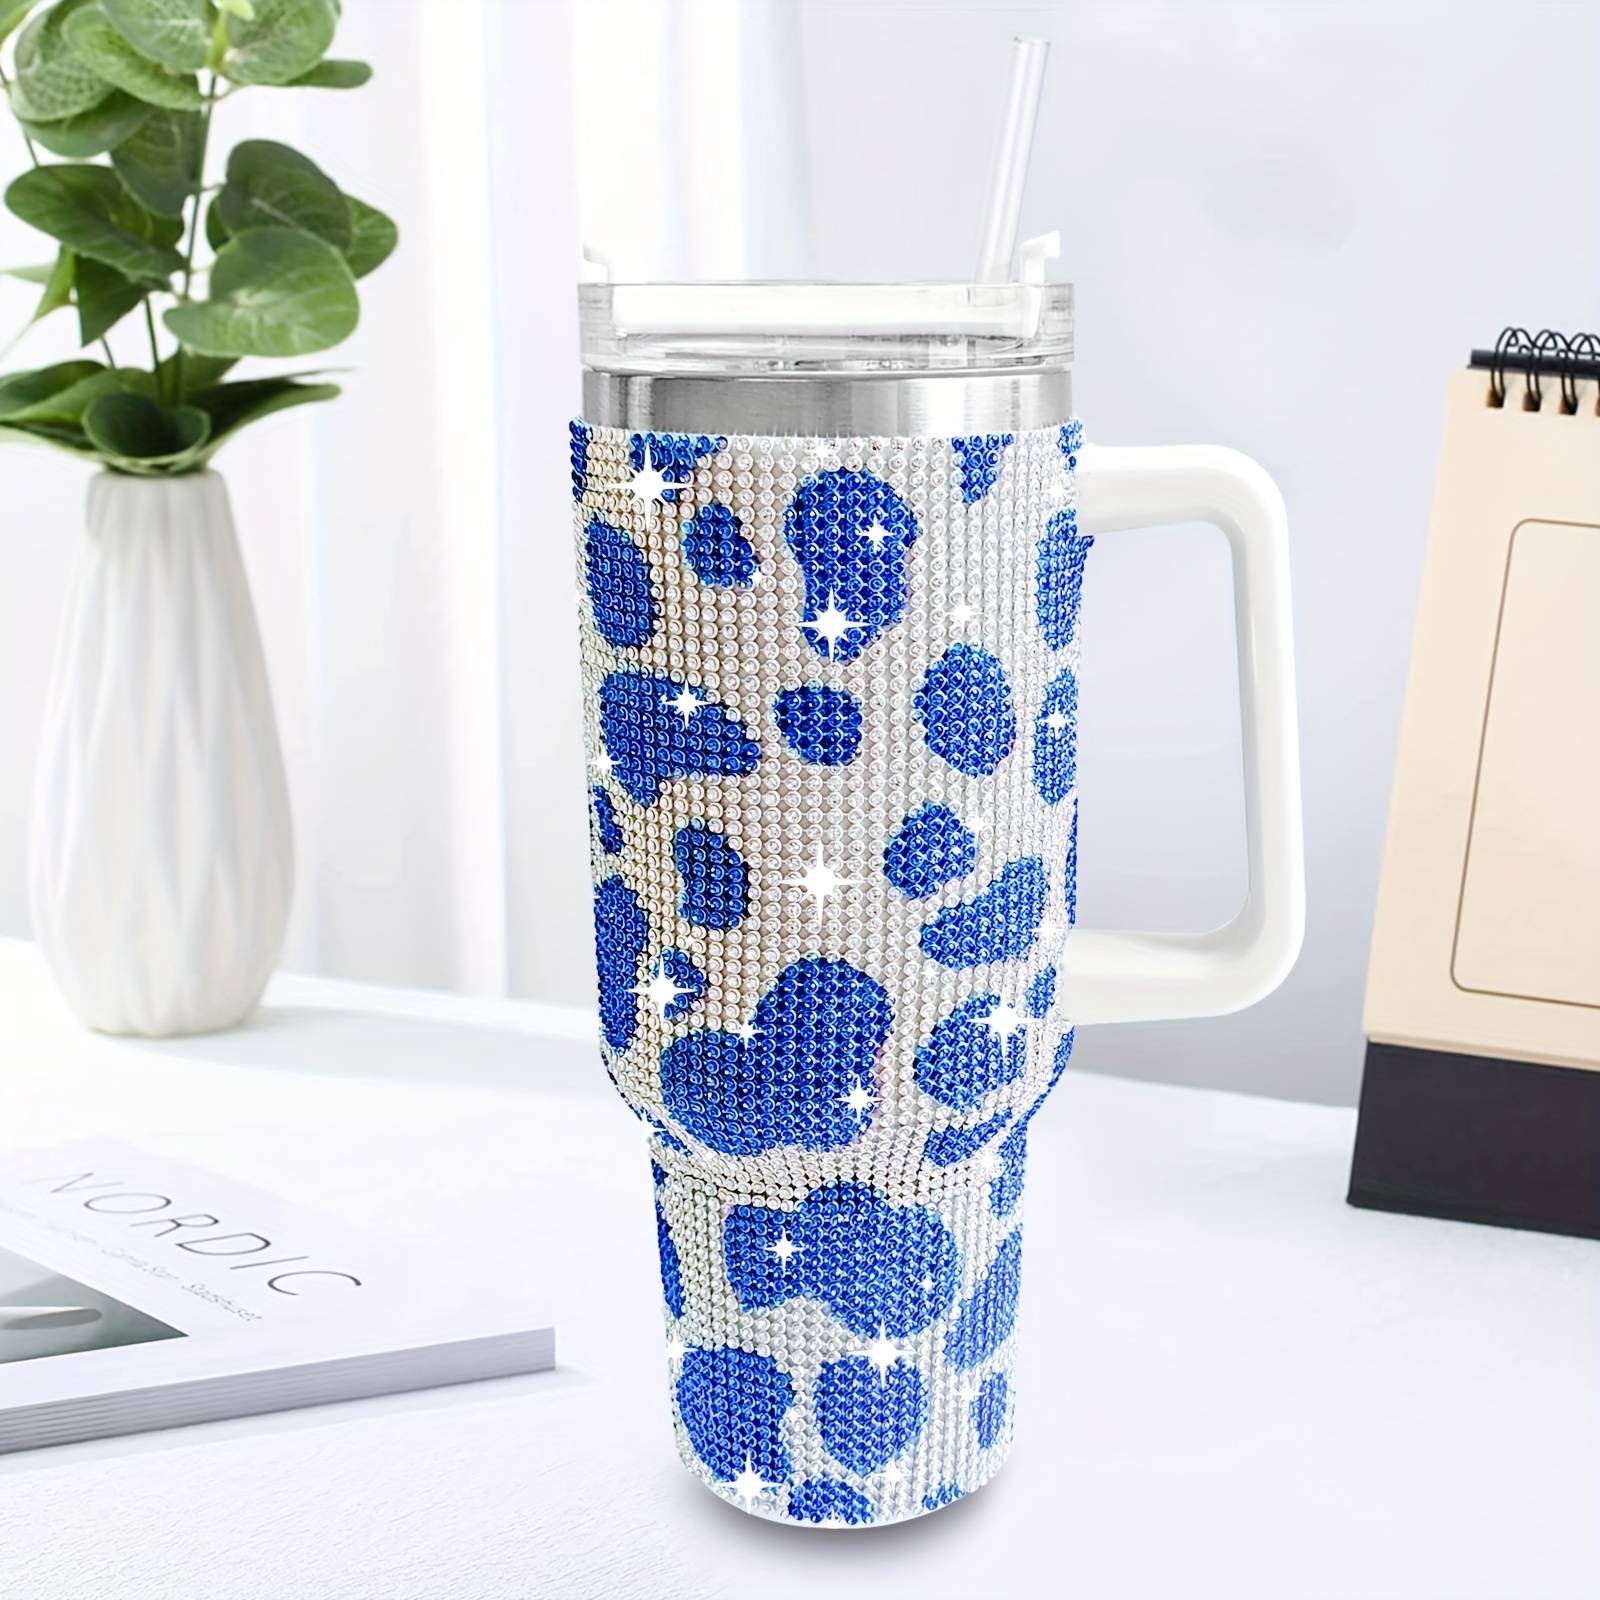 1pc Stainless Steel Tumbler With Handle, 40oz Blue Cup For Car, Office